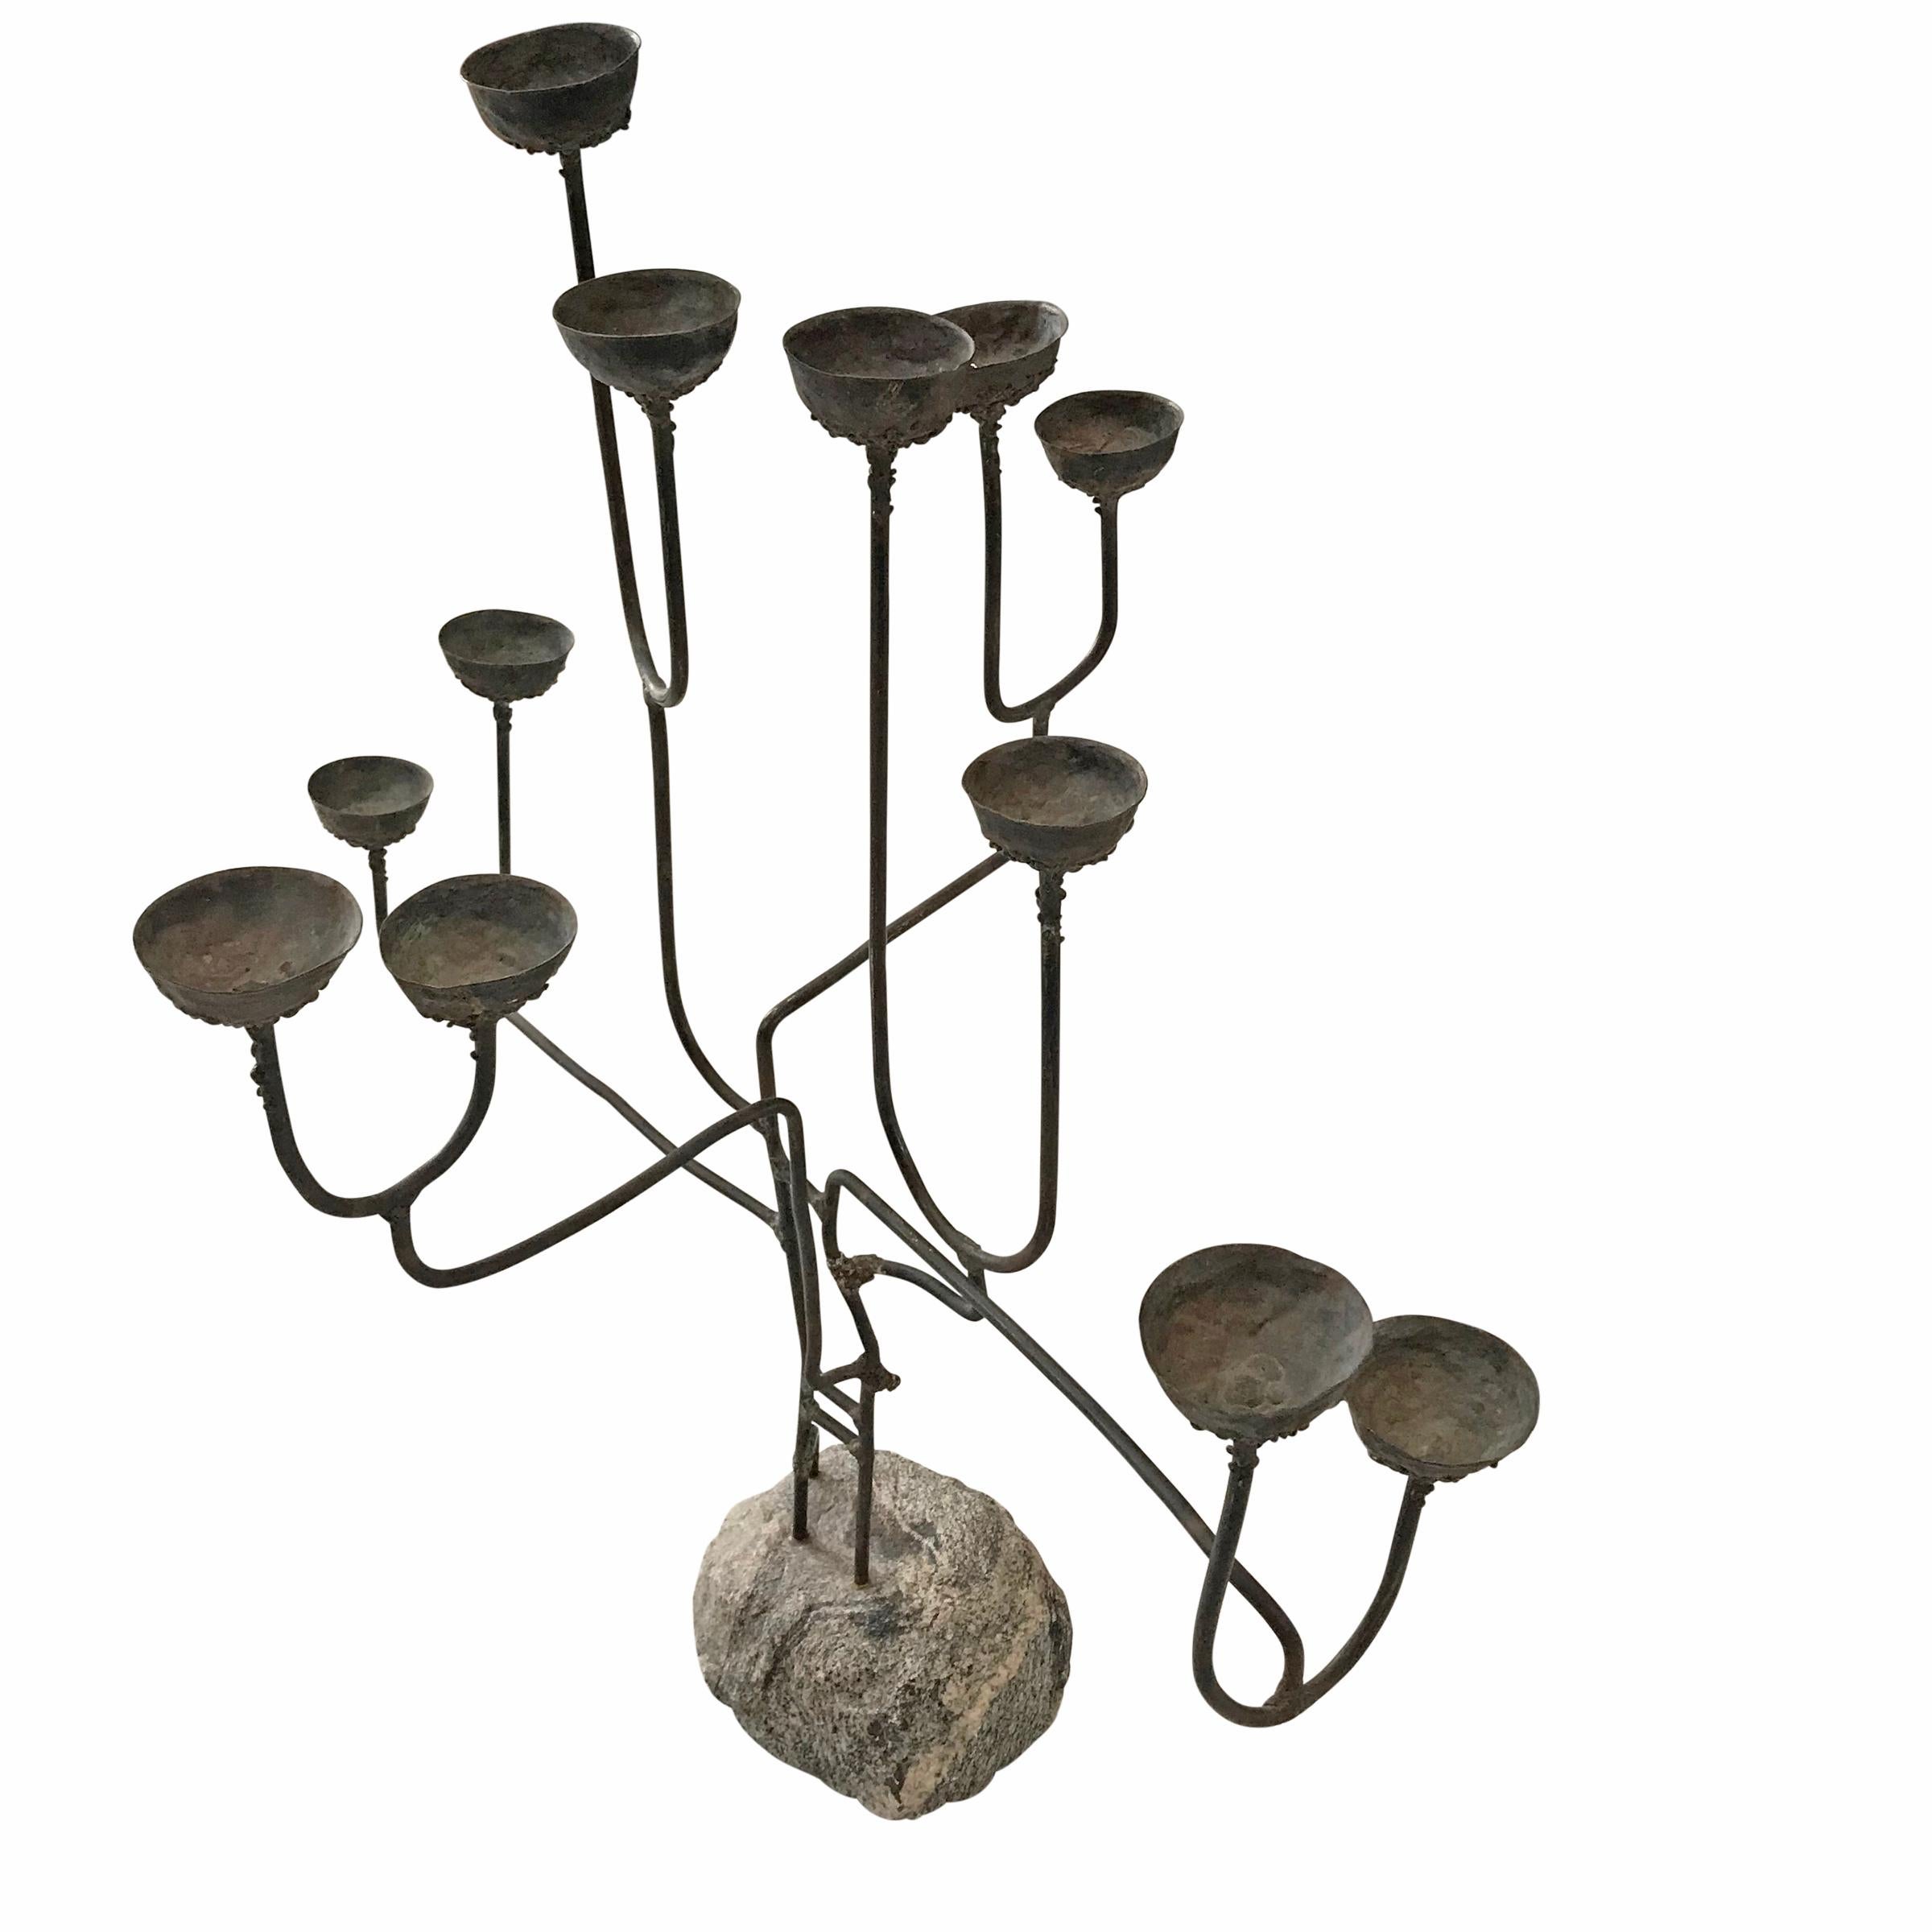 An incredible mid-20th century American Brutalist bronze twelve-arm candelabra with applied bronze drips surrounding the cups, and anchored with a granite bolder.